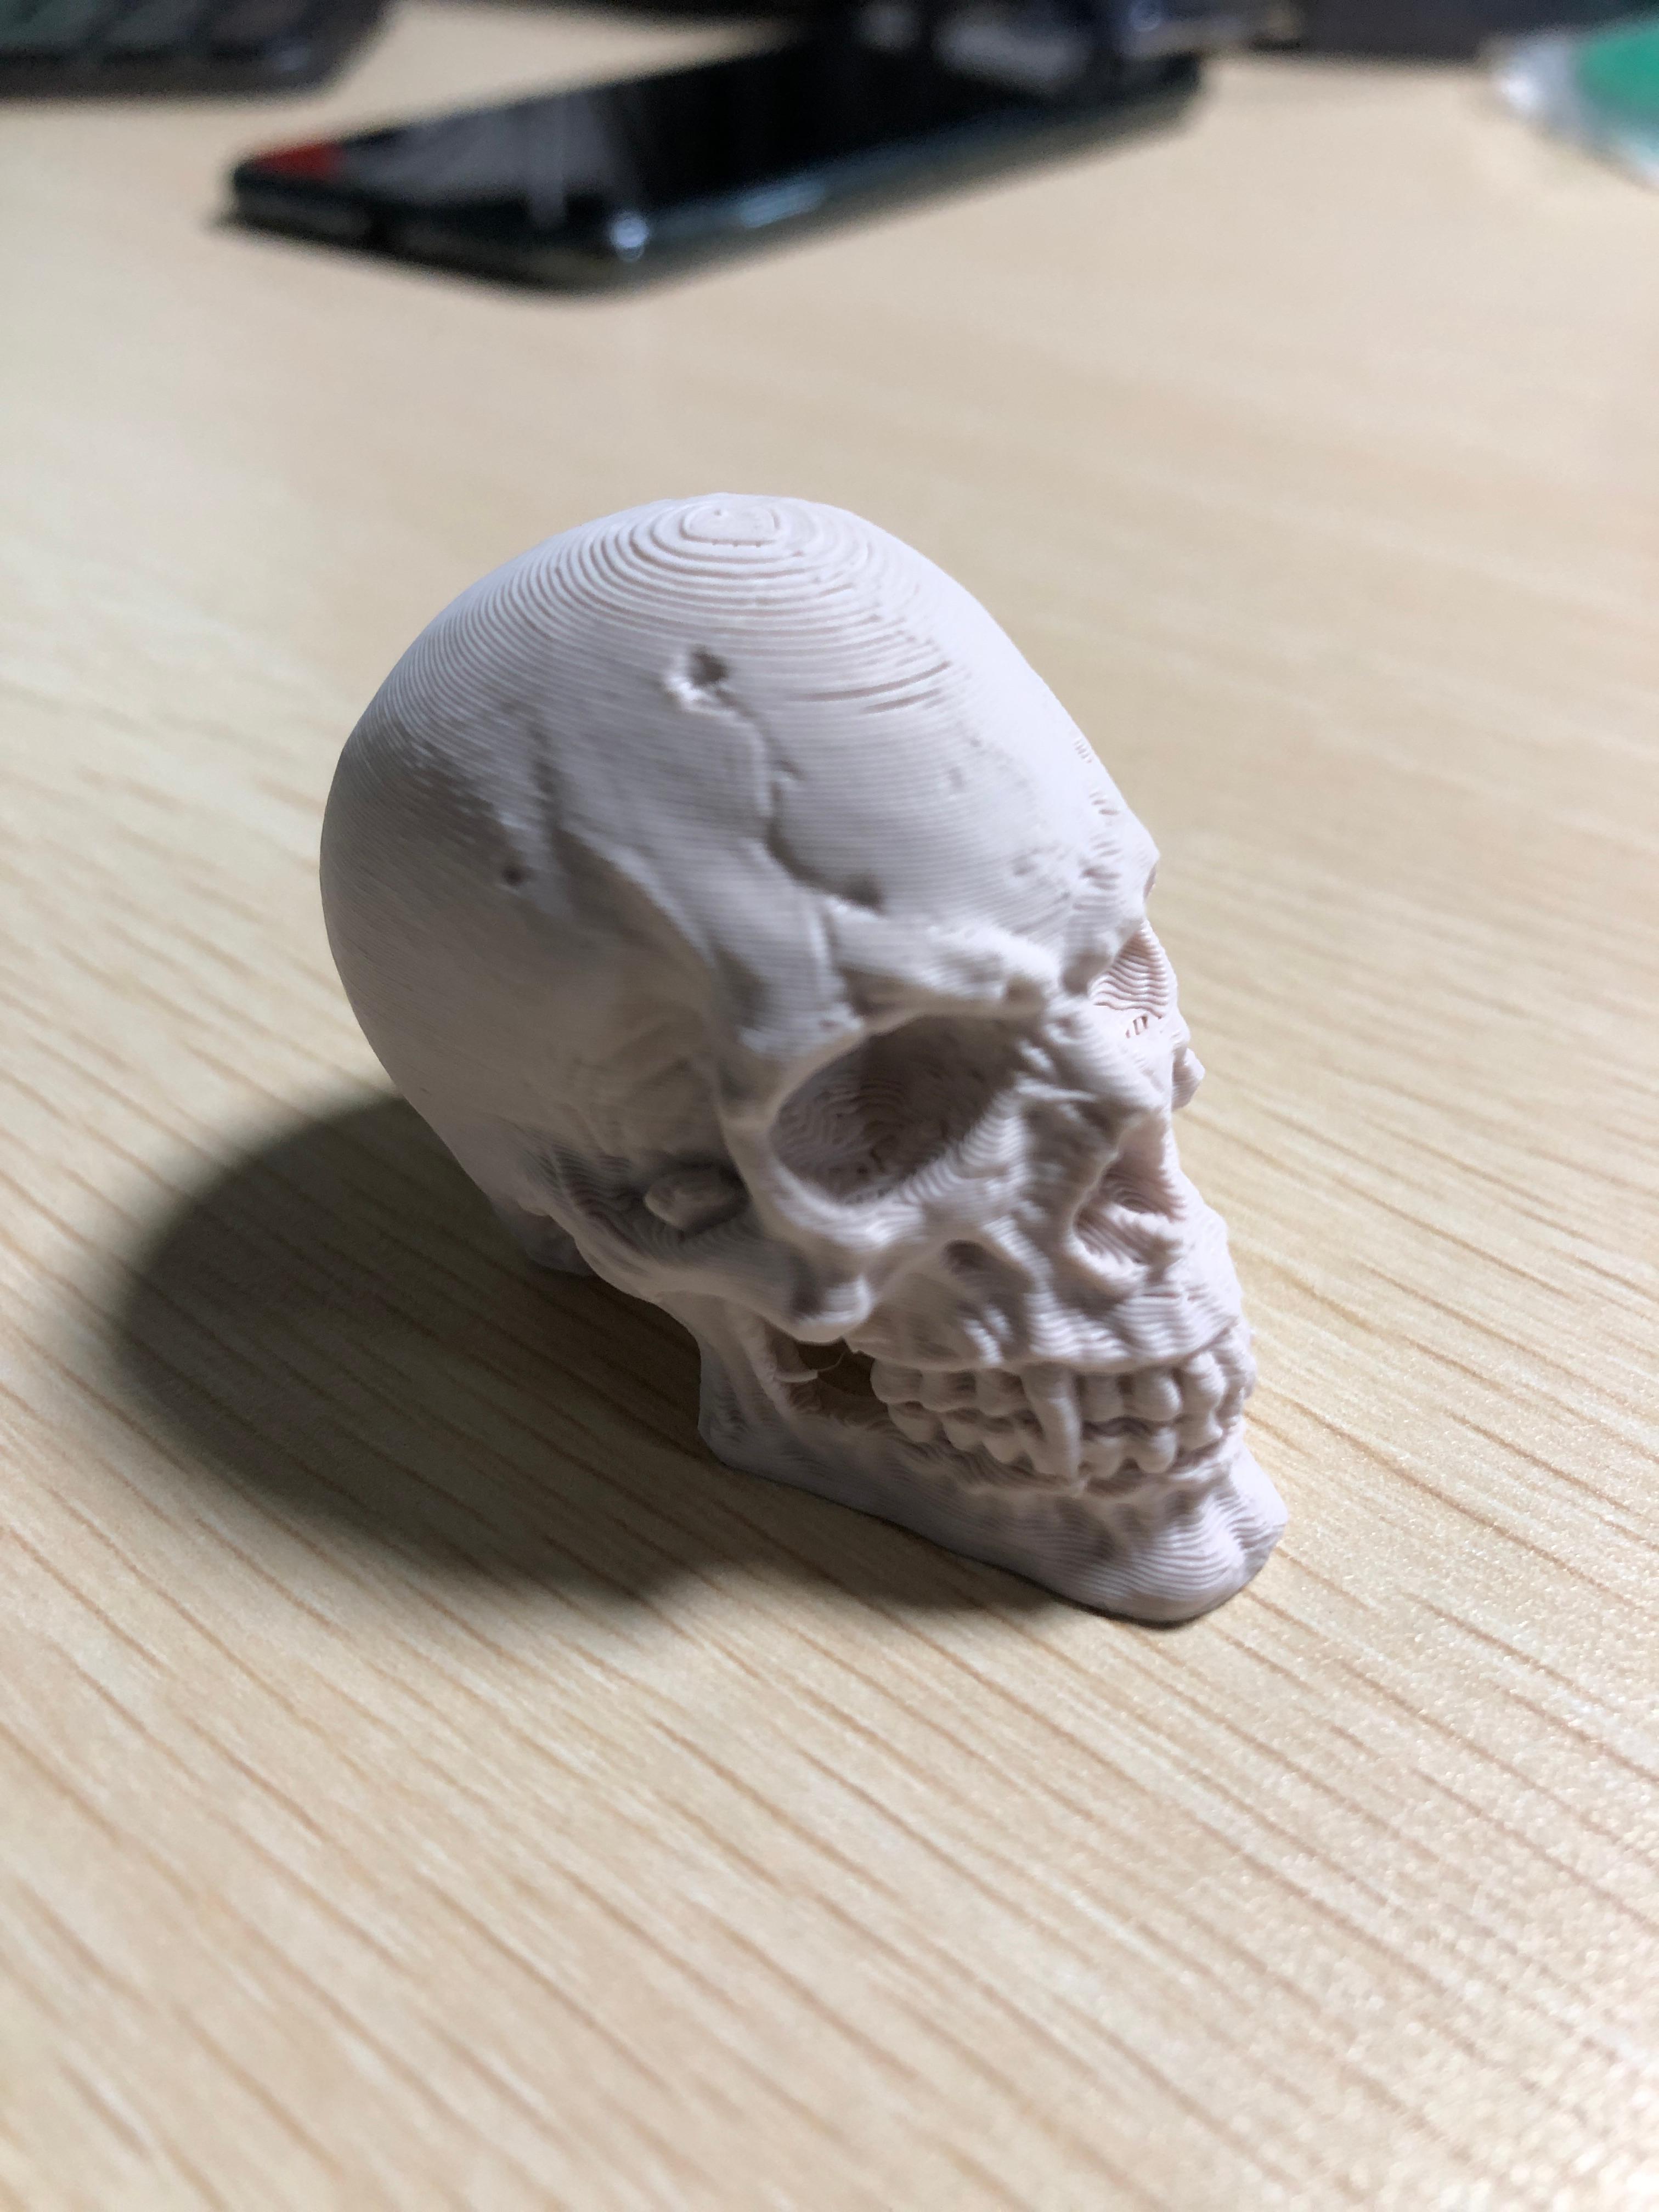 Vampire Skull  - 50% print size. I'm still tuning my slice to remove the swirl on top. The detail is amazing! Very well done PrintedObsession. This took a little under 2 hours to print. - 3d model